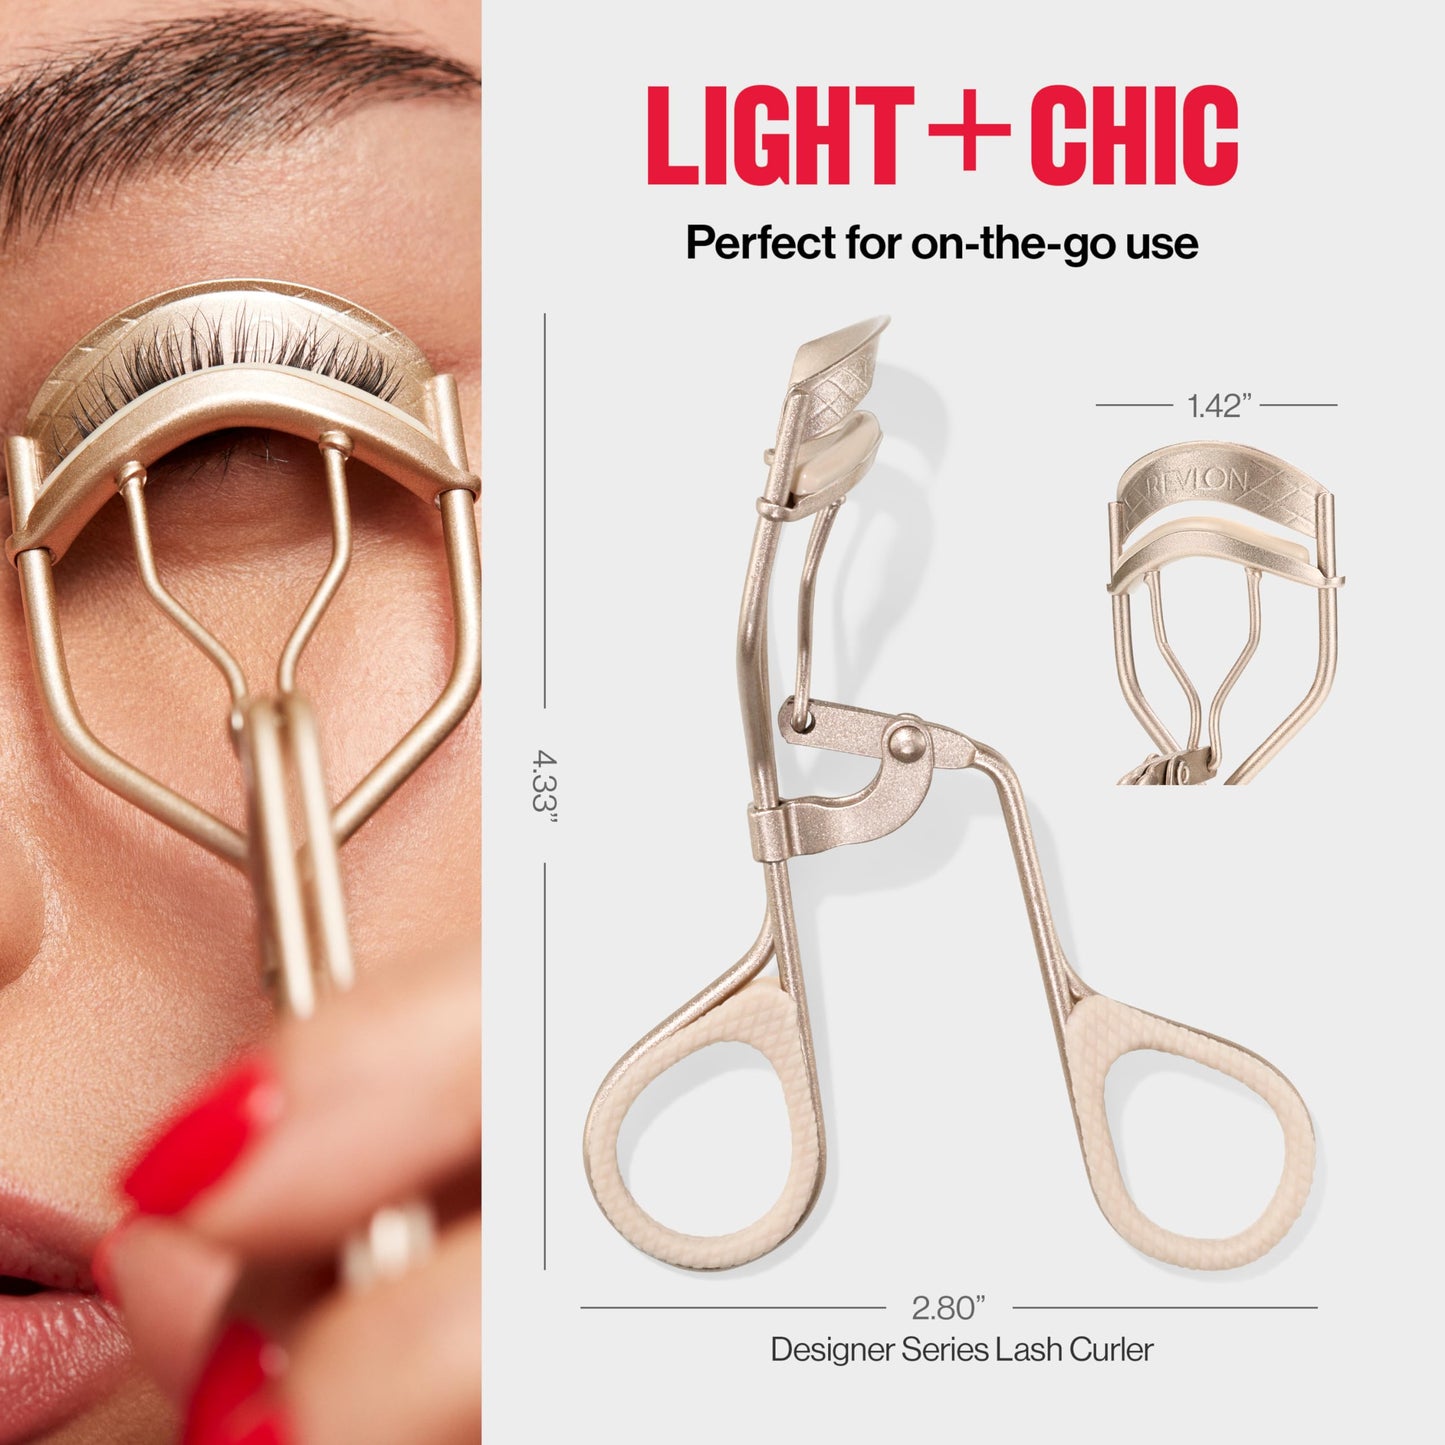 Revlon Designer Series Lash Curler, Eyelash Lift for an Eye Opening Look, with Finger Grips for a Non Slip Grip, Easy to Use, 1 Count